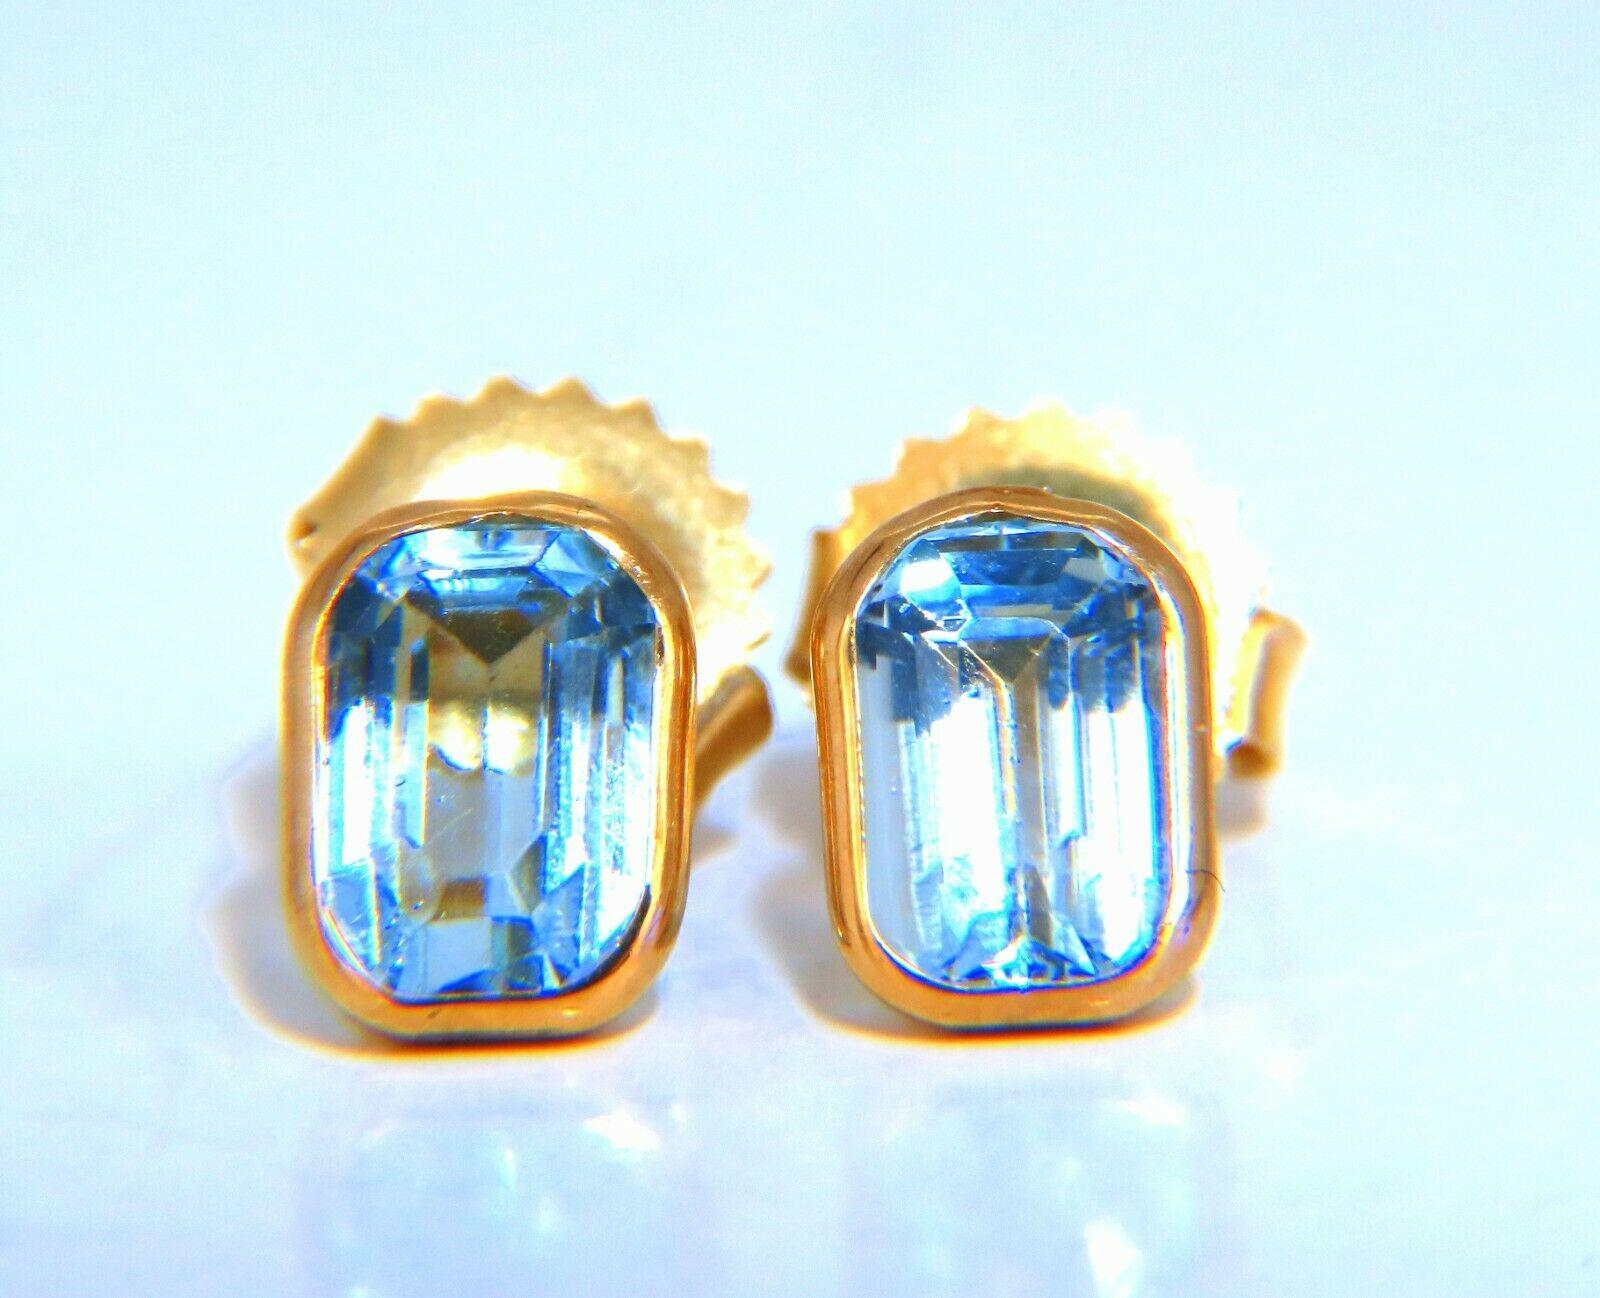 Classic stud earrings

2ct natural Emerald cut Blue Topaz.

Clean clarity and transparent.

6 x 4mm each.

14kt Yellow gold 1.3 gram